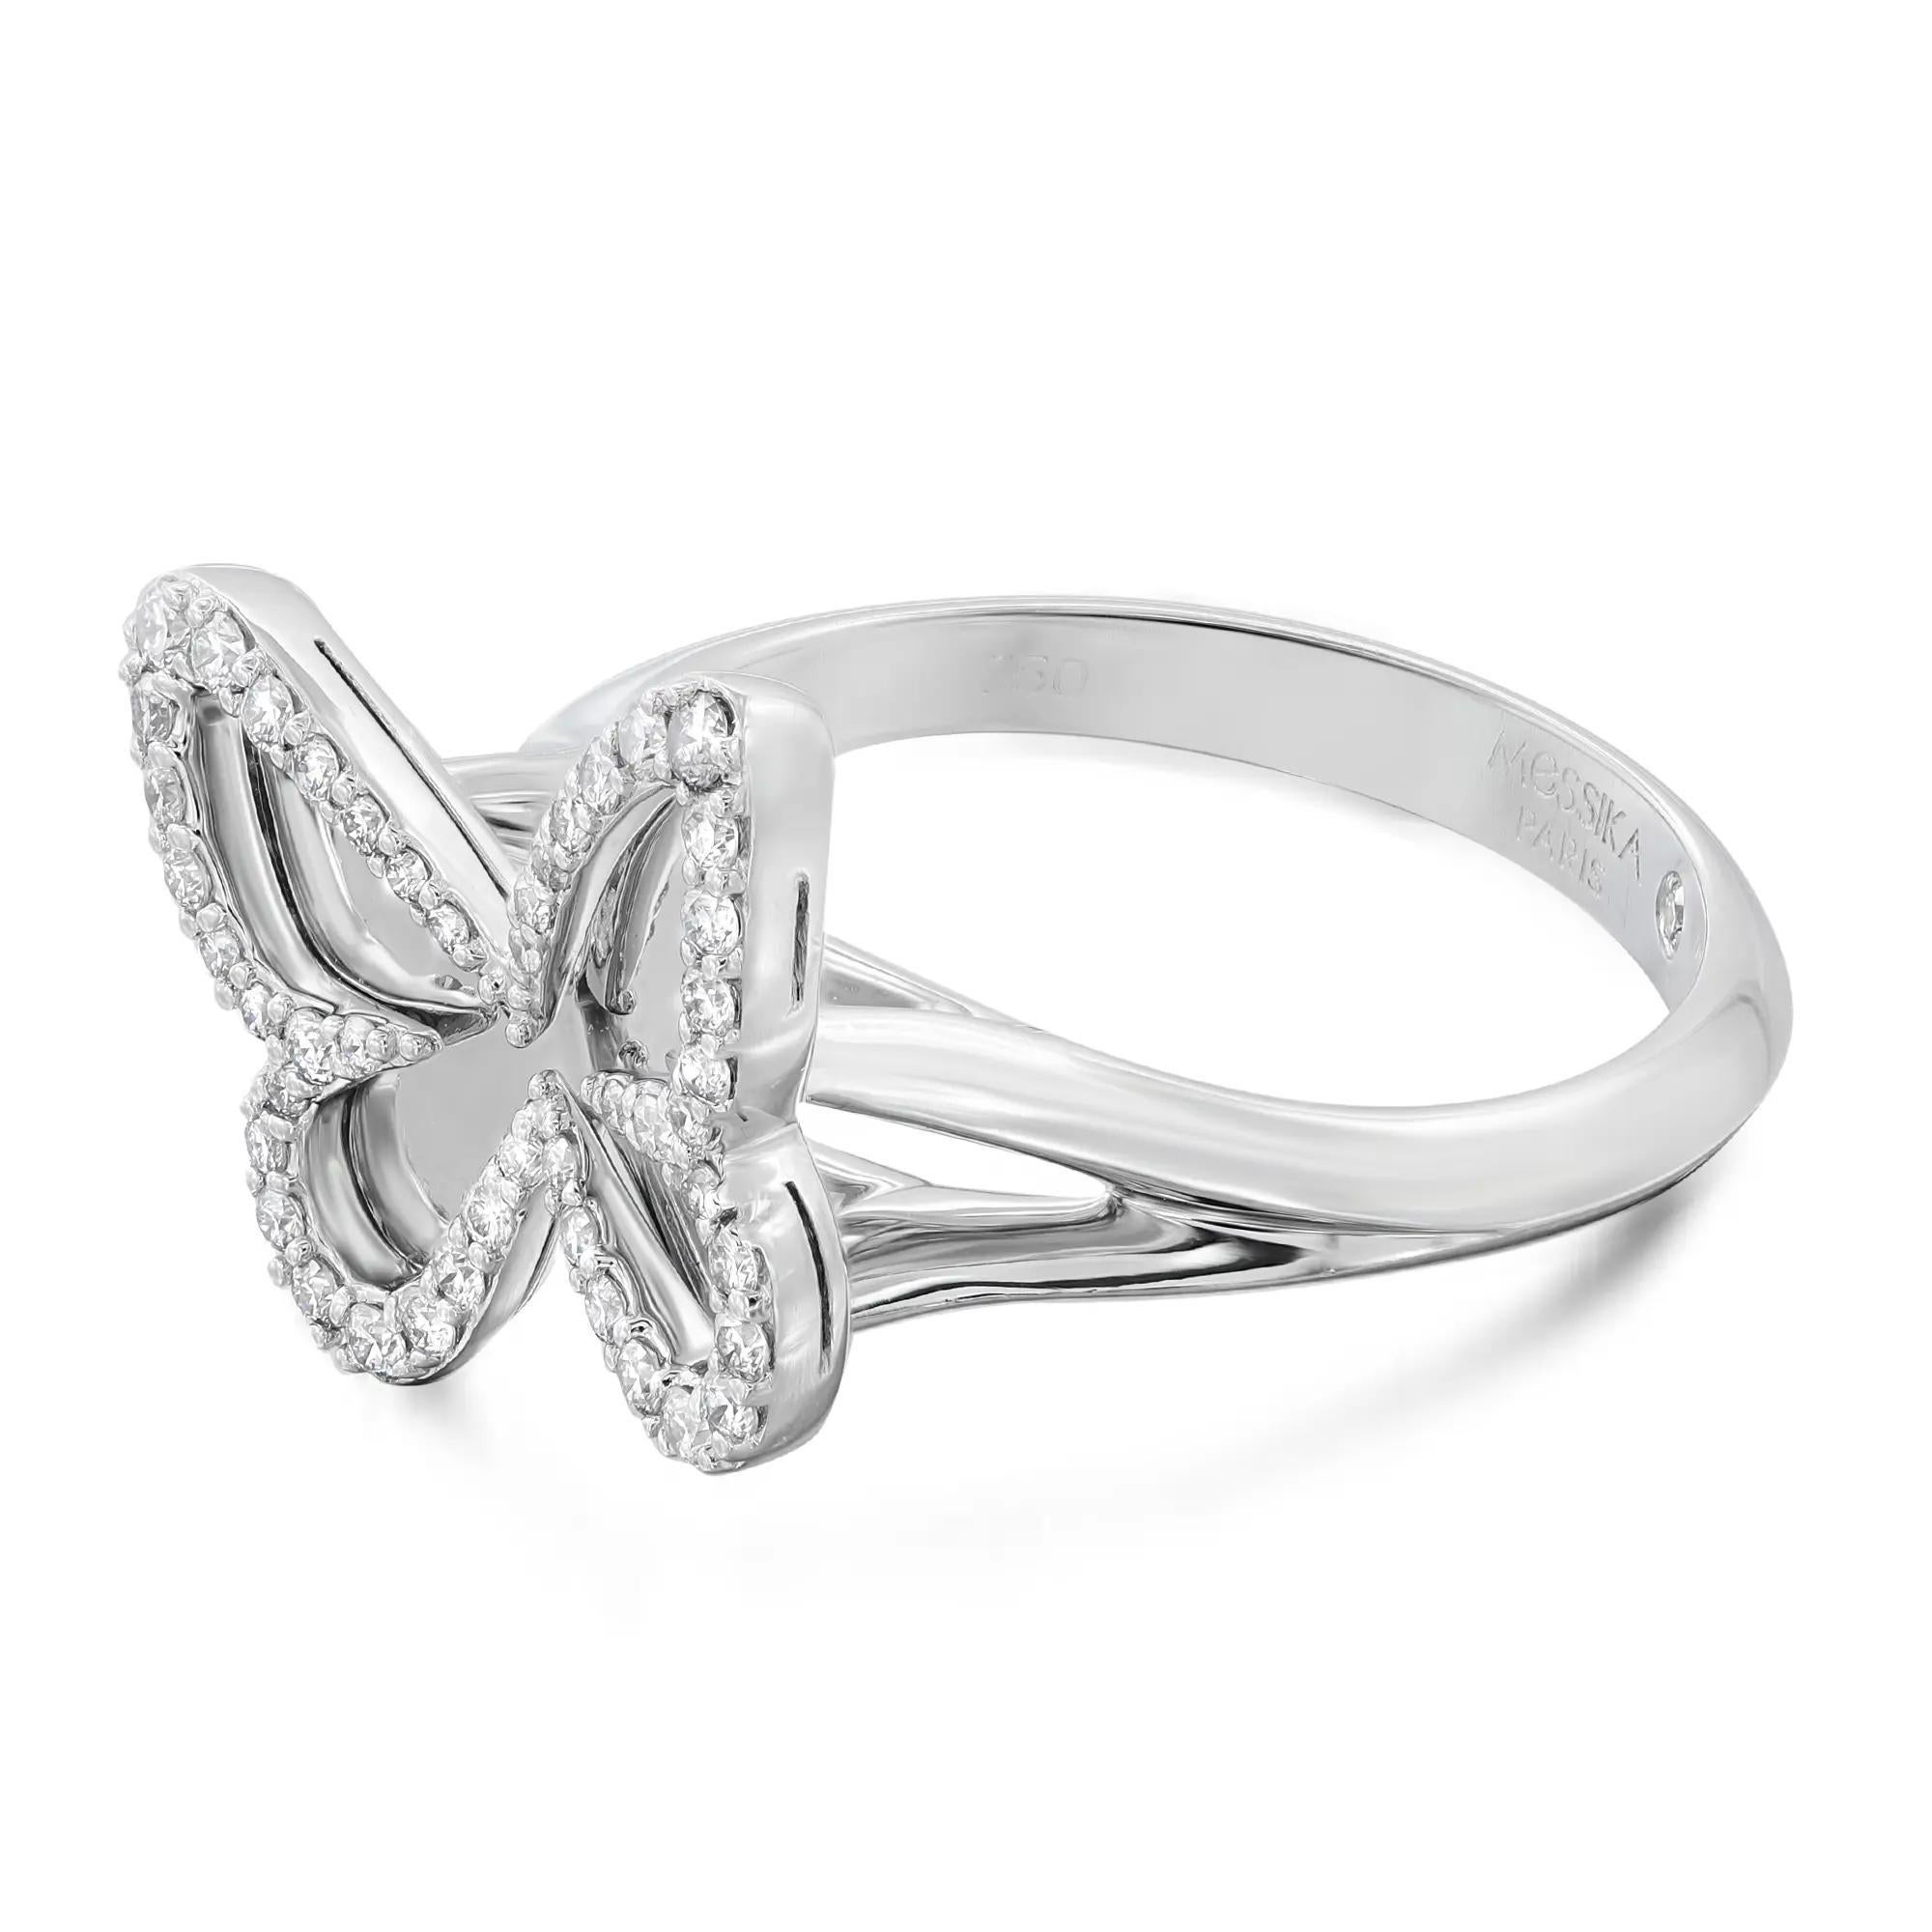 Fun and quirky, Plaque Butterfly diamond ring from Messika. This beautiful ring features a mirror effect crafted in lustrous 18K white gold. Adorned with pave set dazzling round brilliant cut diamonds weighing 0.27 carat. Diamond color G and clarity